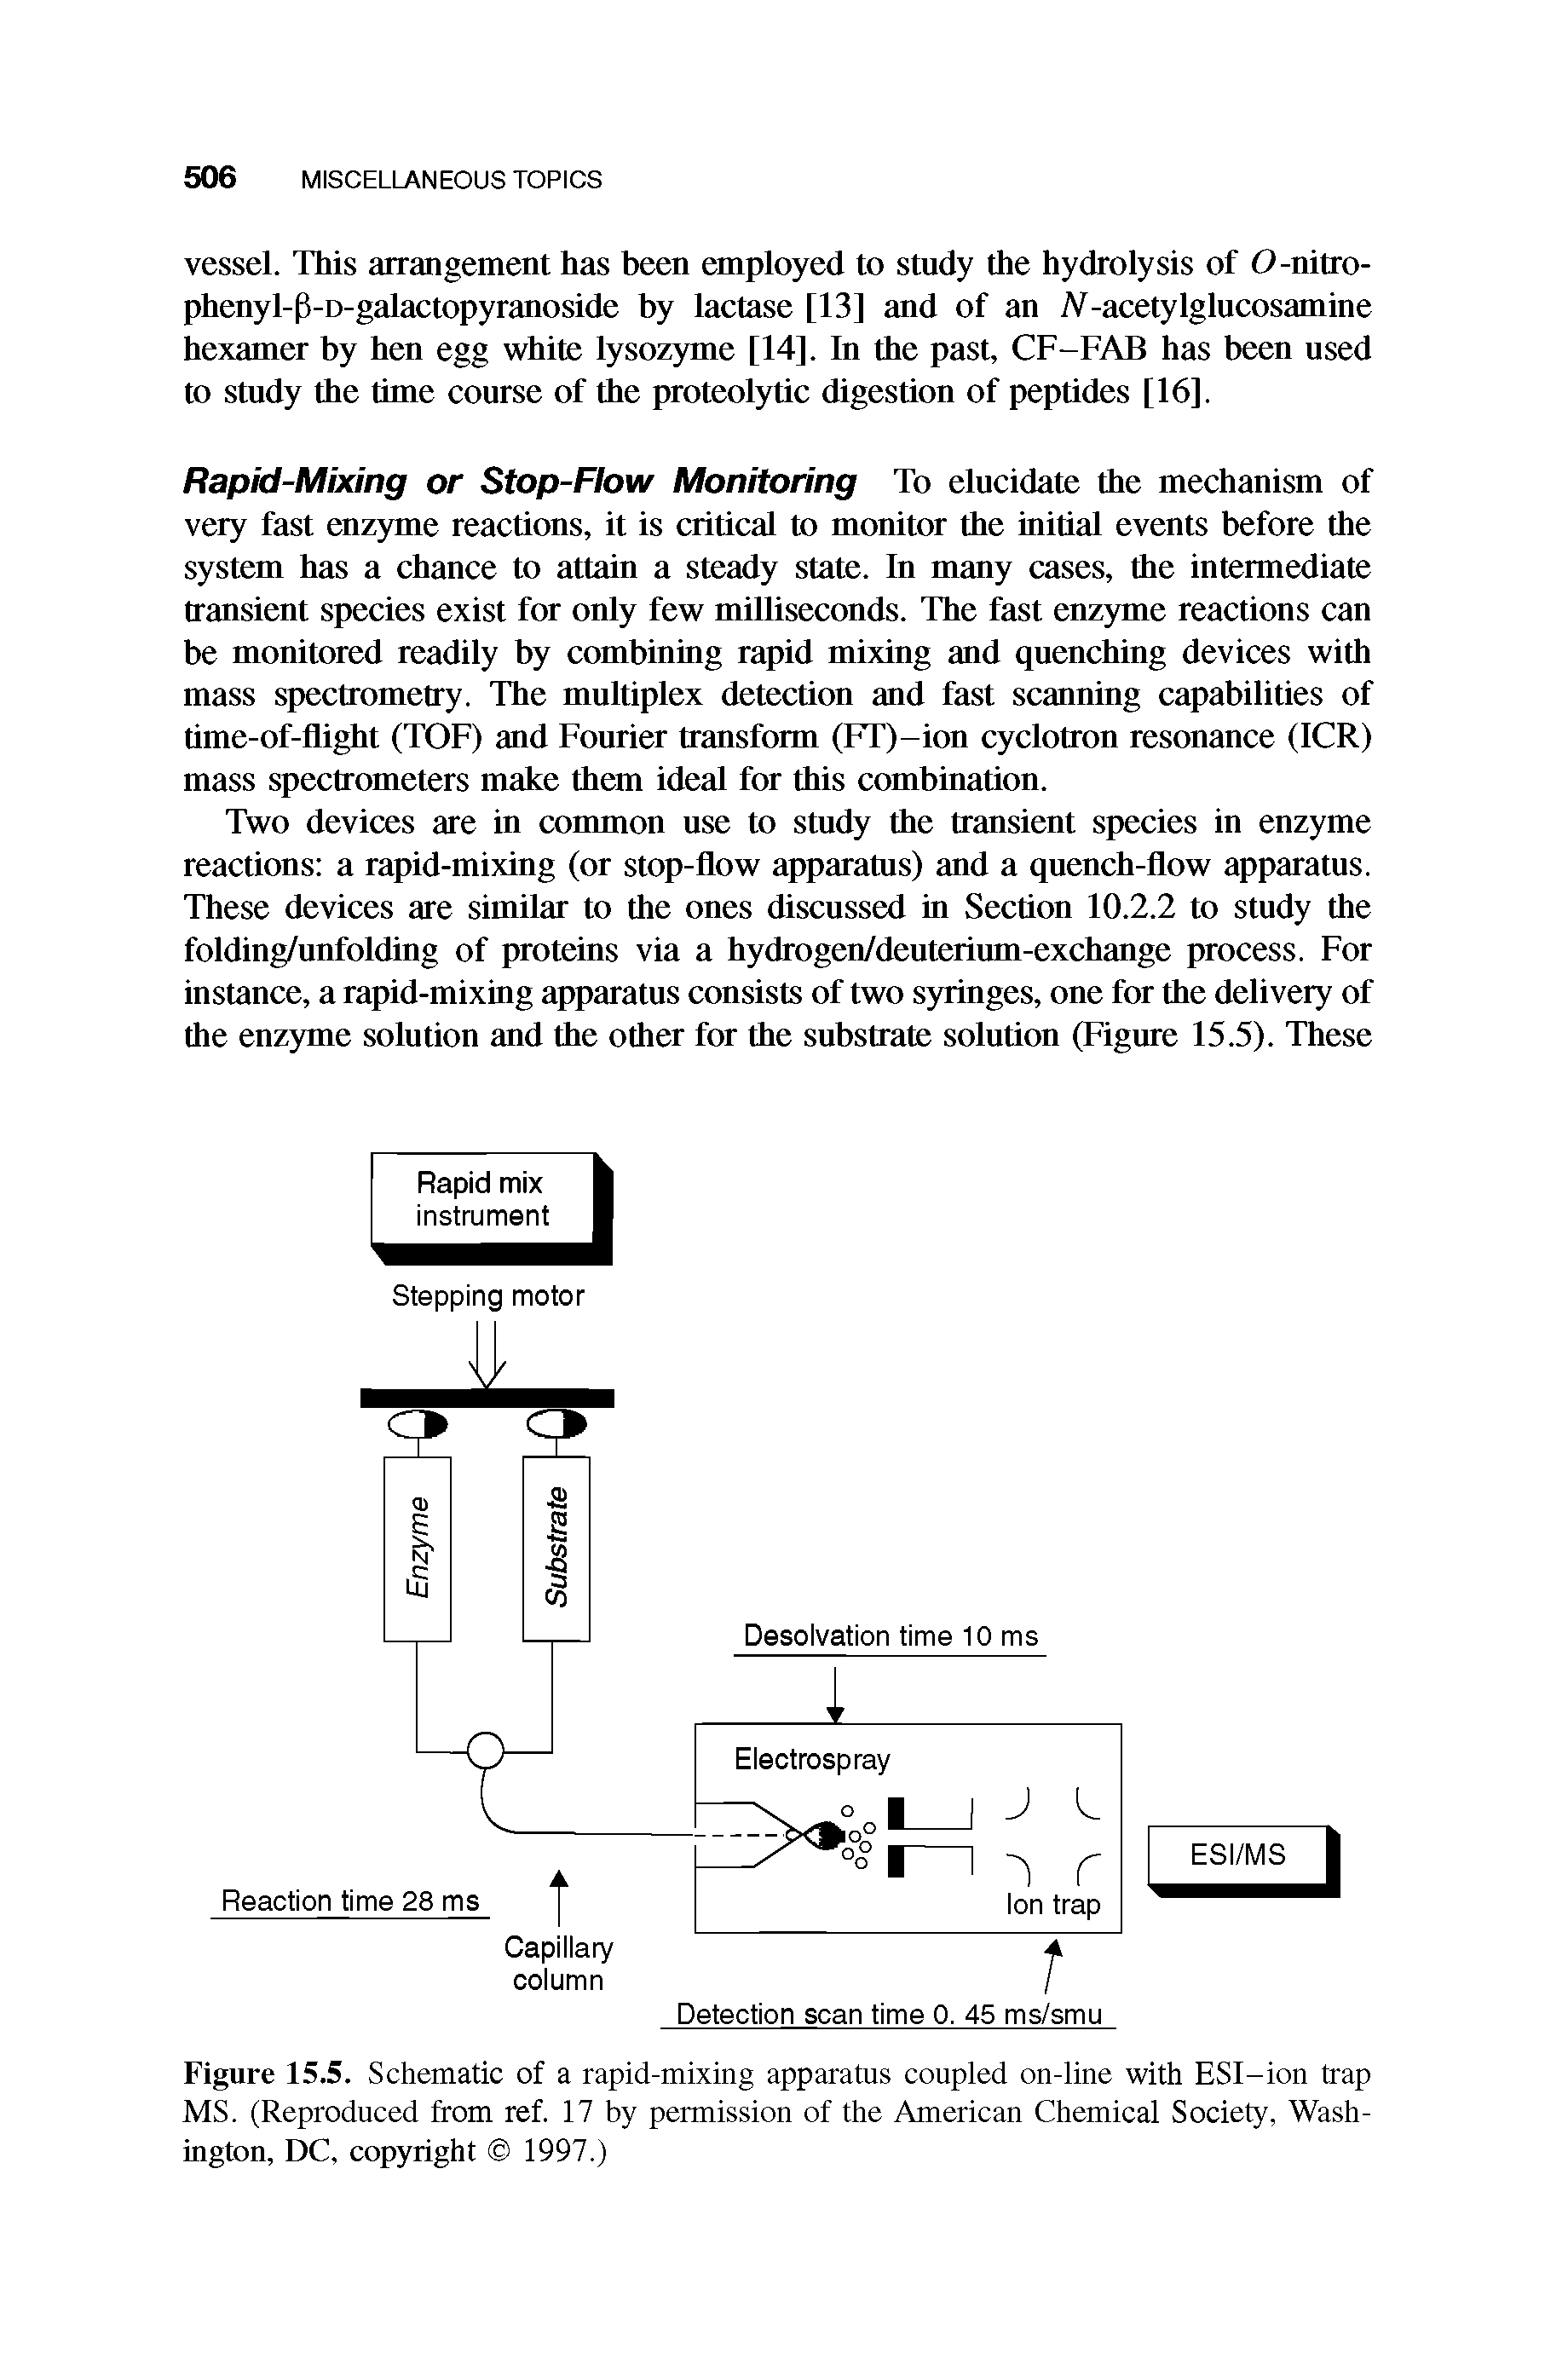 Figure 15.5. Schematic of a rapid-mixing apparatus coupled on-line with ESI-ion trap MS. (Reproduced from ref. 17 by permission of the American Chemical Society, Washington, DC, copyright 1997.)...